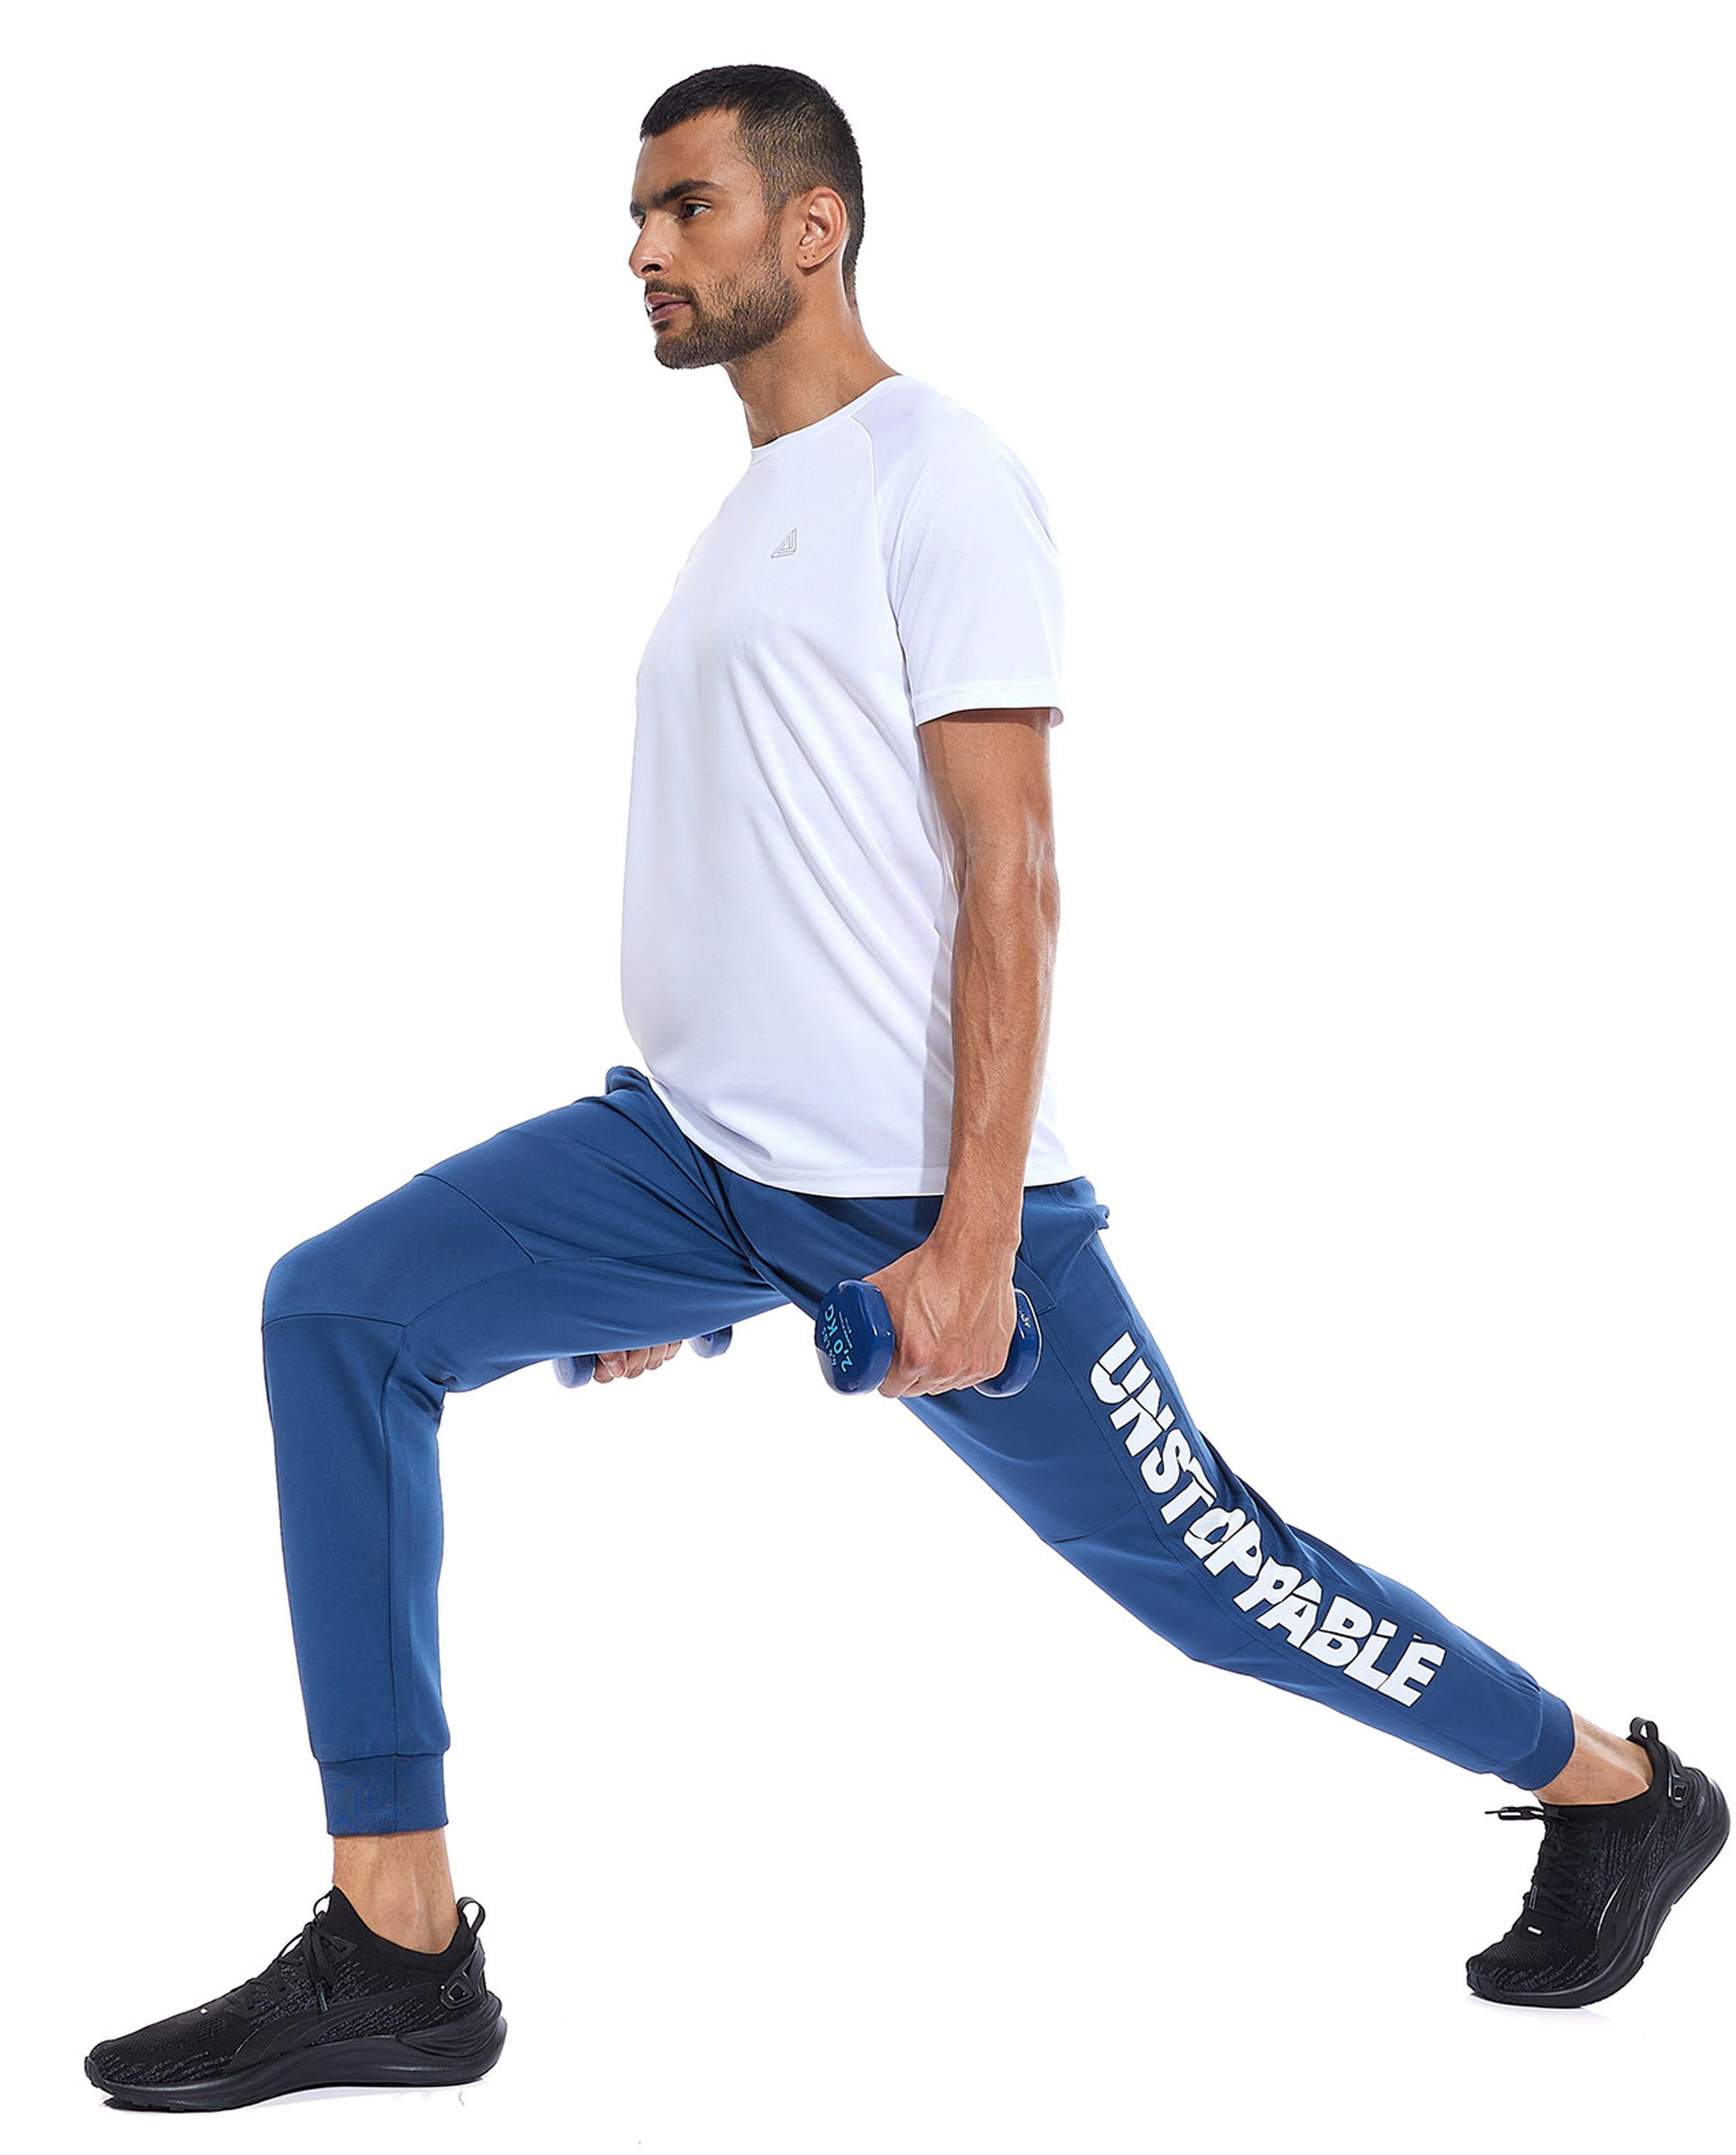 Printed Active Joggers with Drawstring Waist